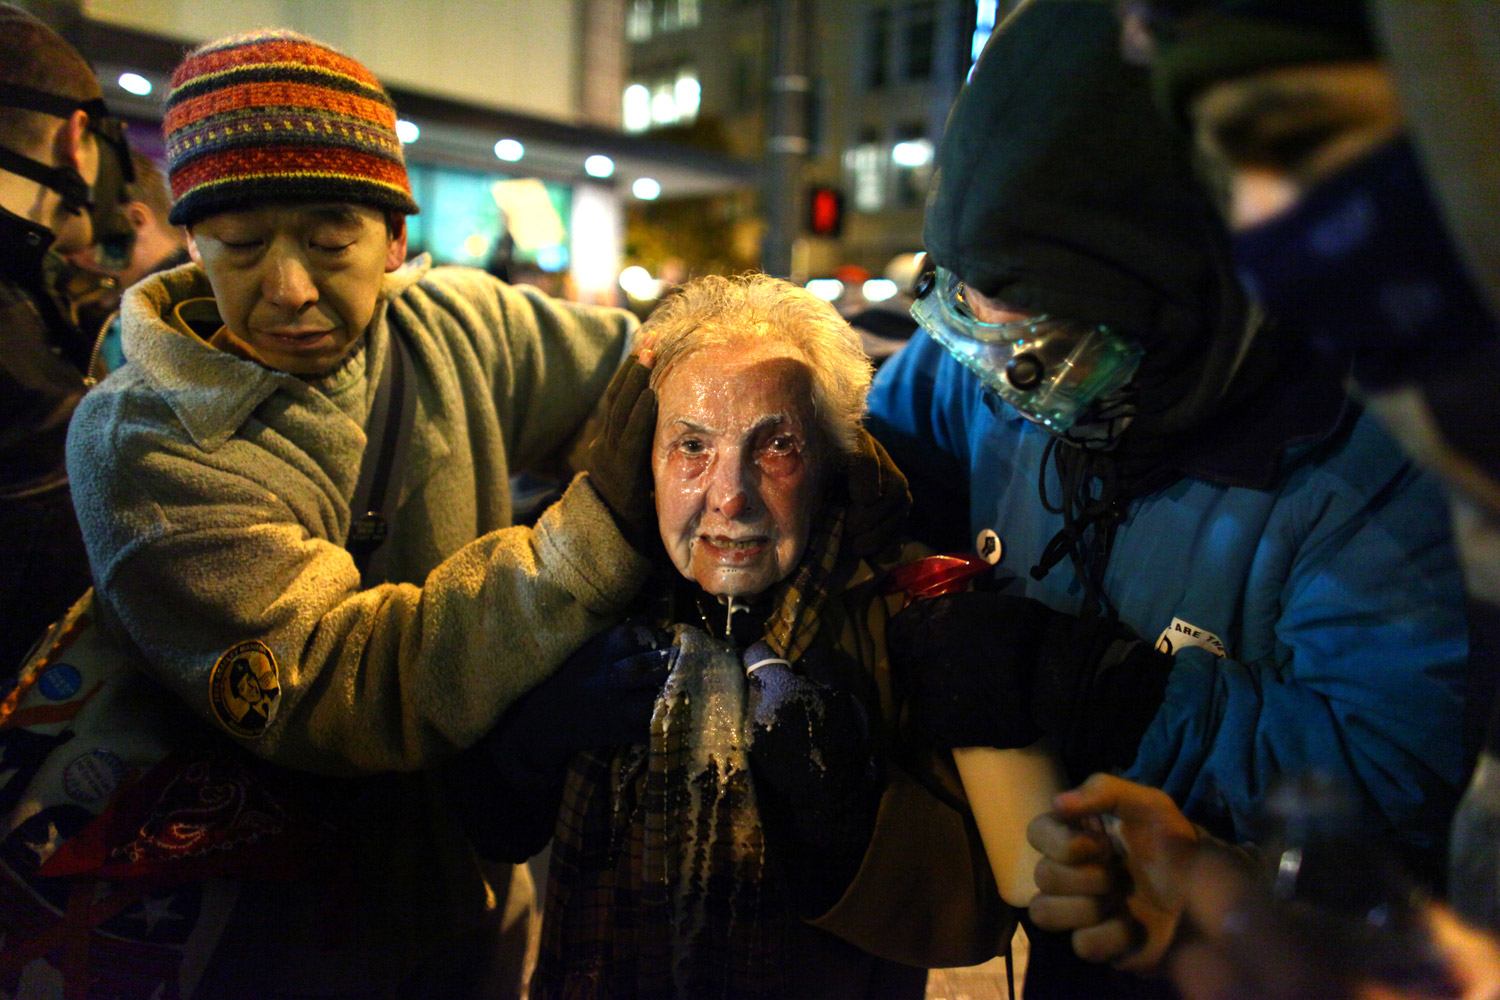 November 15, 2011. Seattle activist Dorli Rainey, 84, reacts after being pepper sprayed by Seattle Police during an Occupy Seattle protest in downtown Seattle. Protesters gathered in the intersection of 5th Avenue and Pine Street after marching from their camp at Seattle Central Community College in support of Occupy Wall Street. Many refused to move from the intersection after being ordered by police. Police then began spraying pepper spray into the gathered crowd hitting dozens of people, some on the sidewalk. A pregnant woman was taken from the melee in an ambulance after being struck with spray.